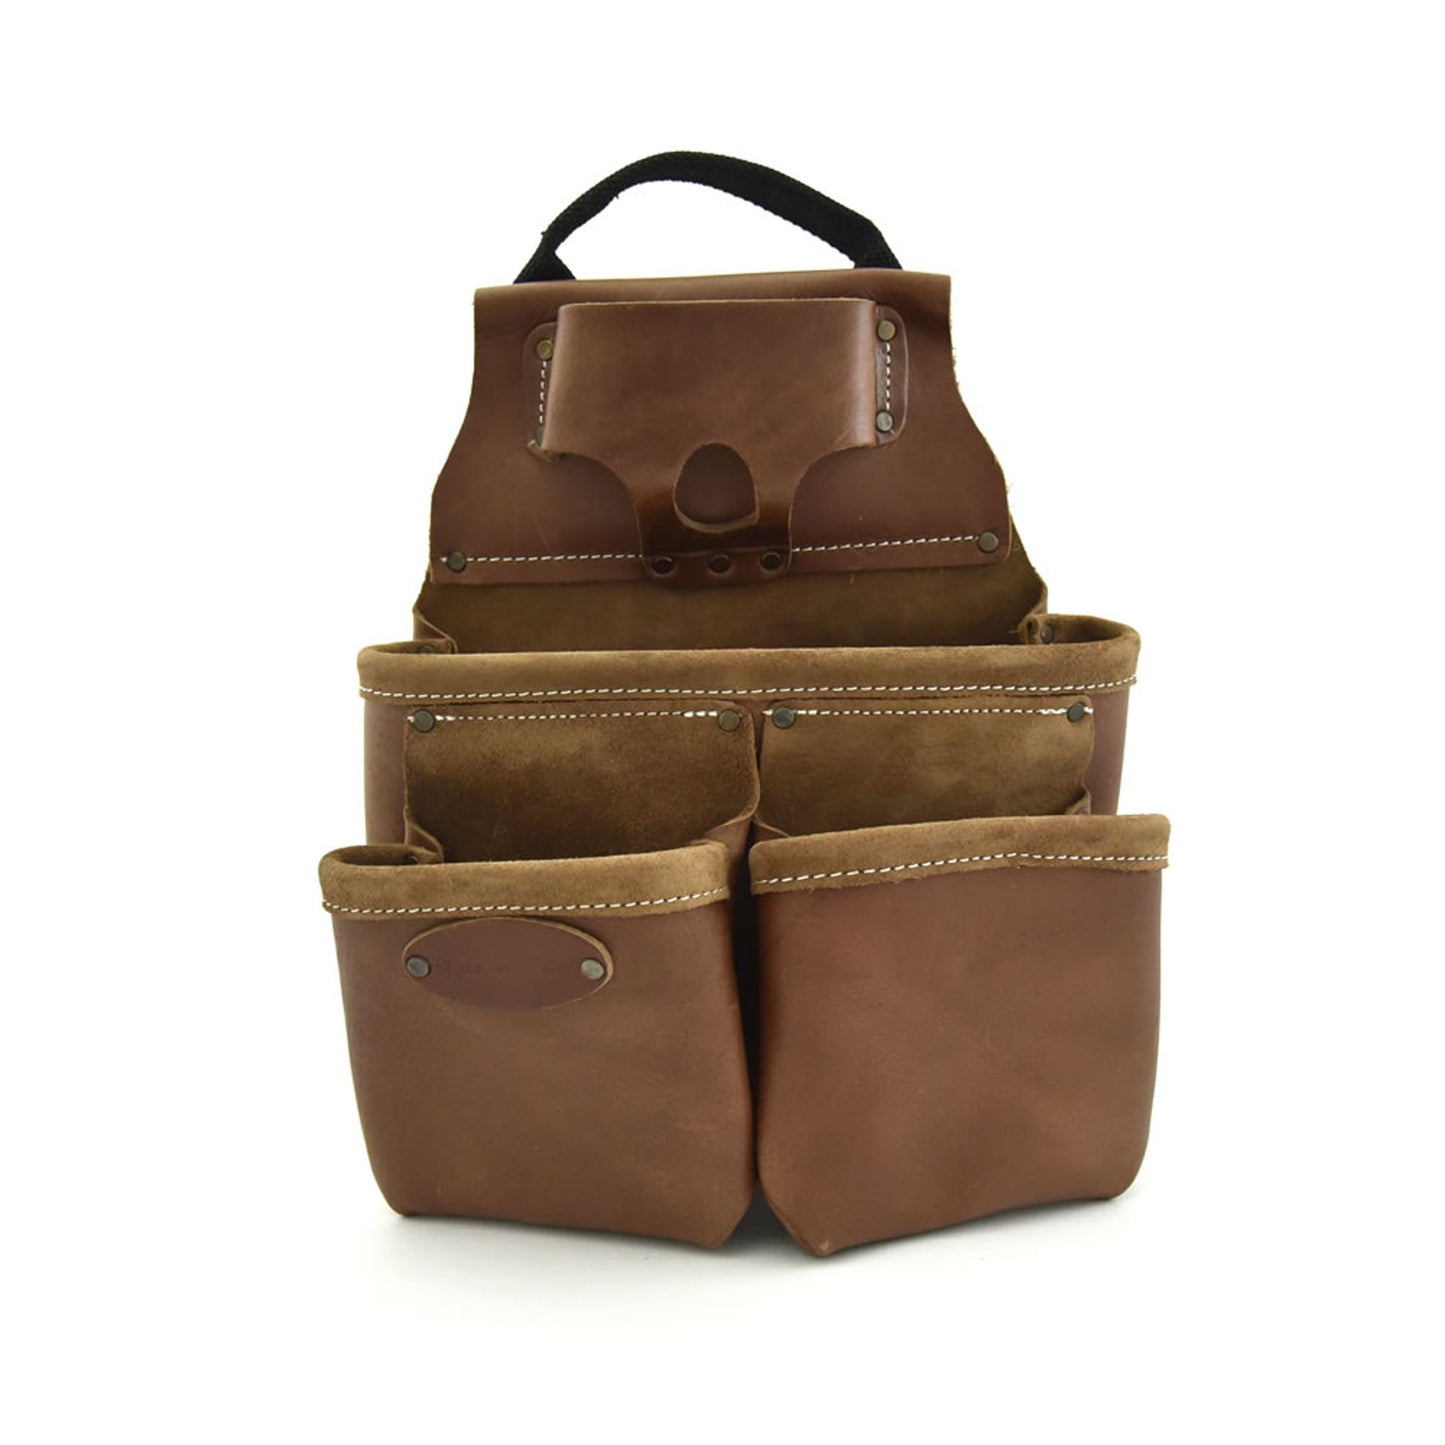 Style n Craft 98435 - 9 Pocket Nail & Tool Pouch in Top Grain Leather in Dark Tan Color